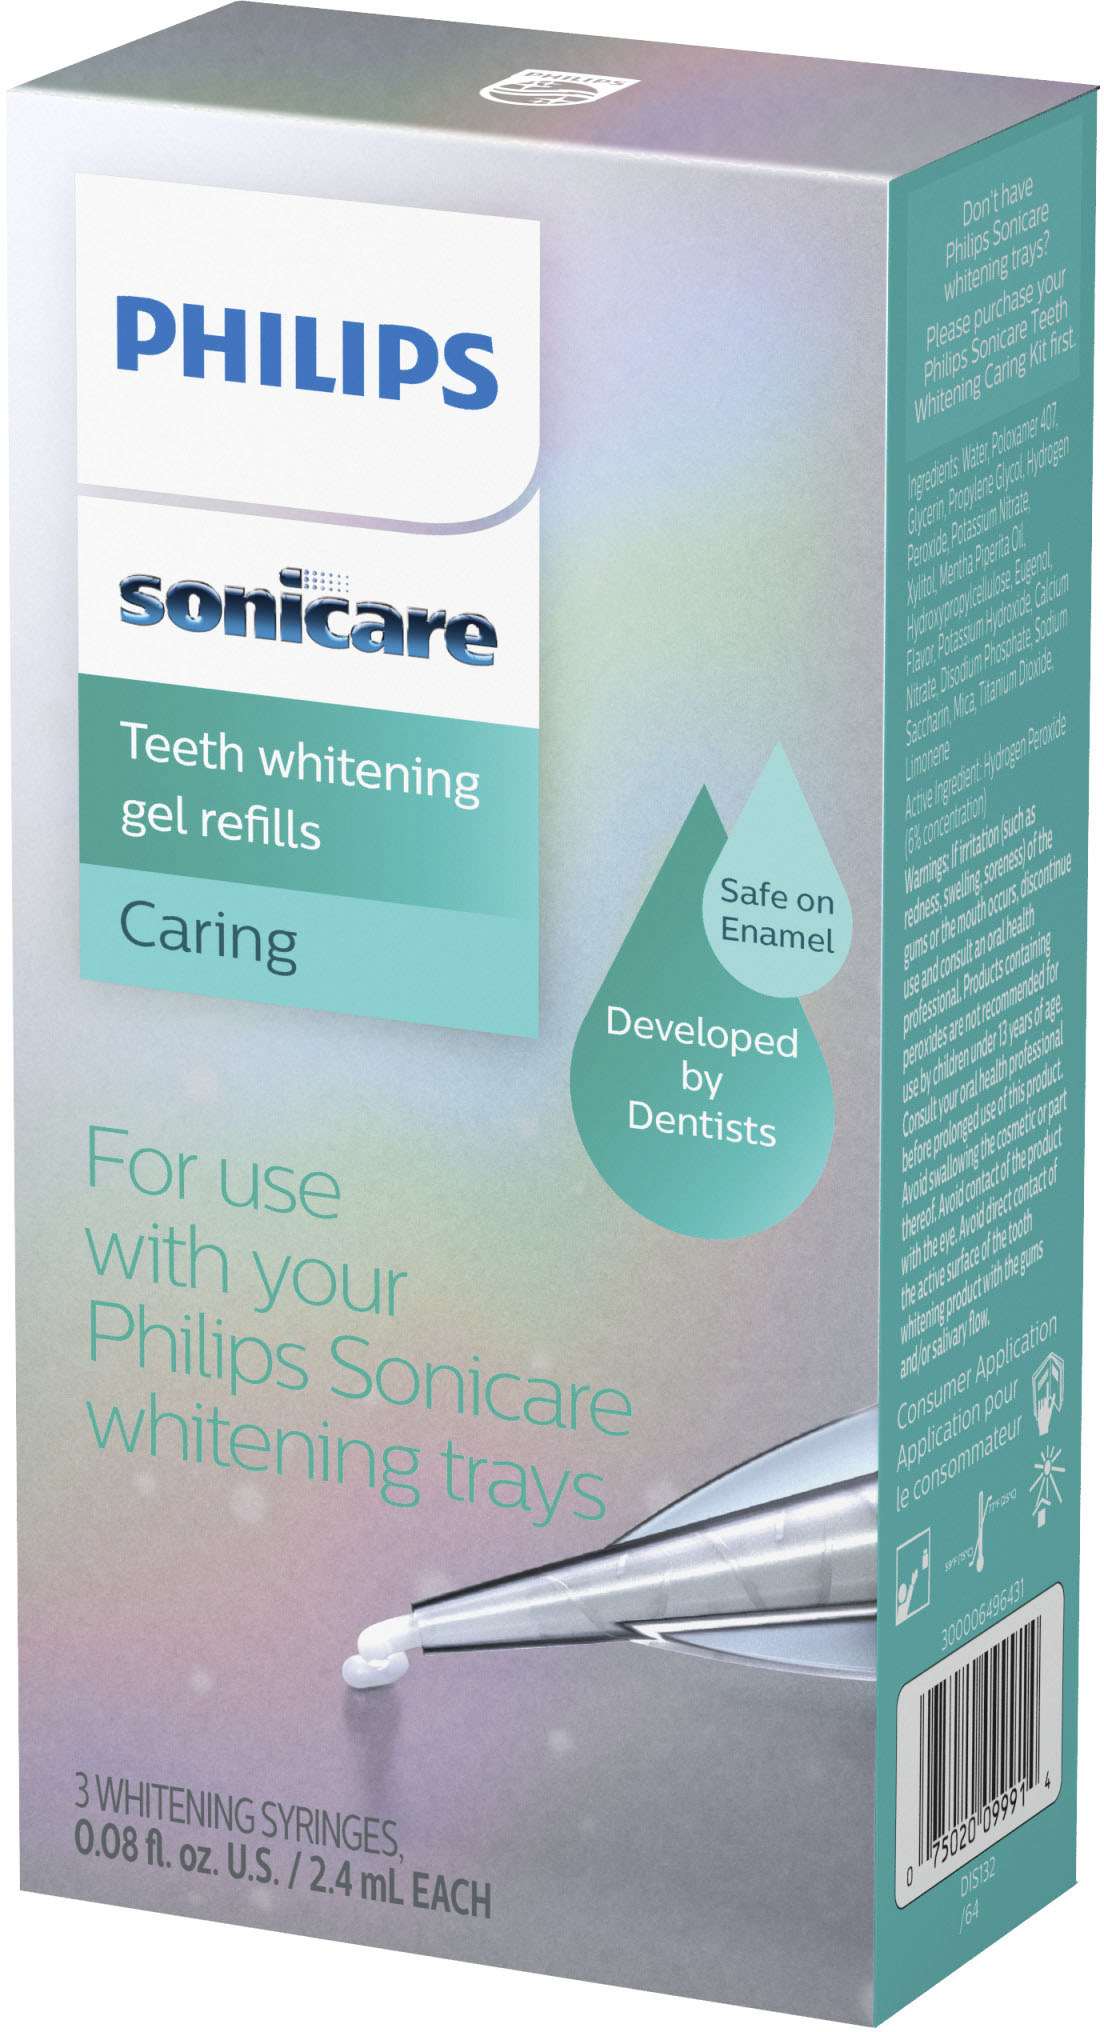 Angle View: Philips Sonicare Teeth Whitening Gel, Caring - White